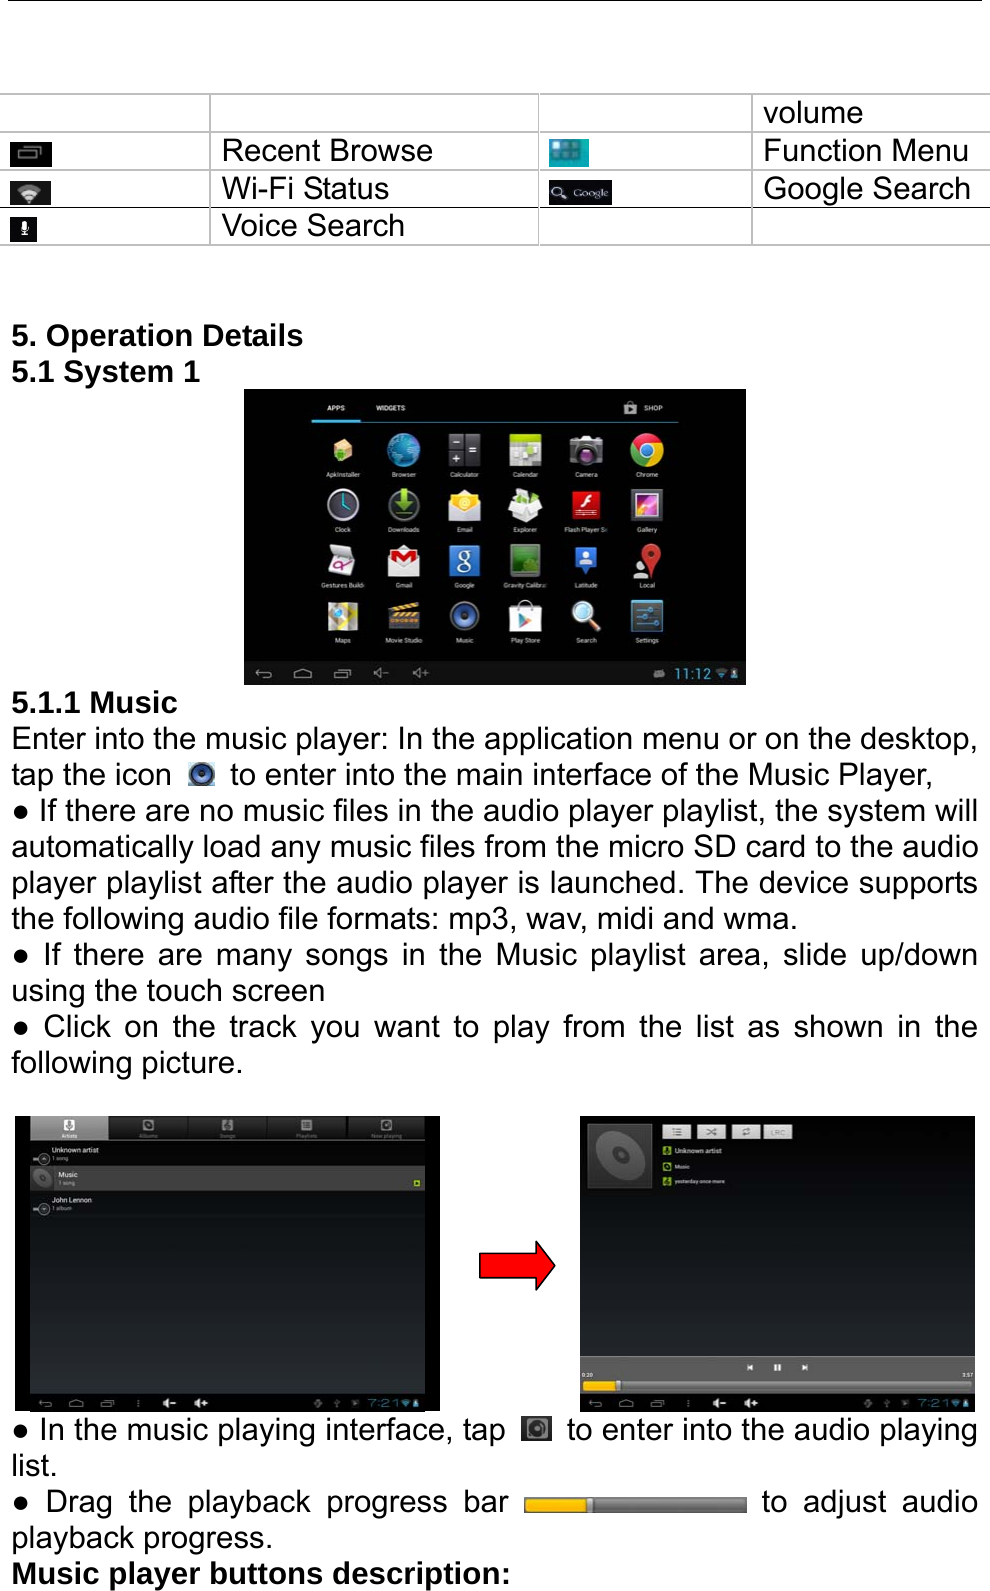   volume  Recent Browse   Function Menu  Wi-Fi Status   Google Search Voice Search       5. Operation Details   5.1 System 1    5.1.1 Music Enter into the music player: In the application menu or on the desktop, tap the icon    to enter into the main interface of the Music Player, ● If there are no music files in the audio player playlist, the system will automatically load any music files from the micro SD card to the audio player playlist after the audio player is launched. The device supports the following audio file formats: mp3, wav, midi and wma. ● If there are many songs in the Music playlist area, slide up/down using the touch screen   ● Click on the track you want to play from the list as shown in the following picture.                 ● In the music playing interface, tap    to enter into the audio playing list.  ● Drag the playback progress bar   to adjust audio playback progress.   Music player buttons description:   